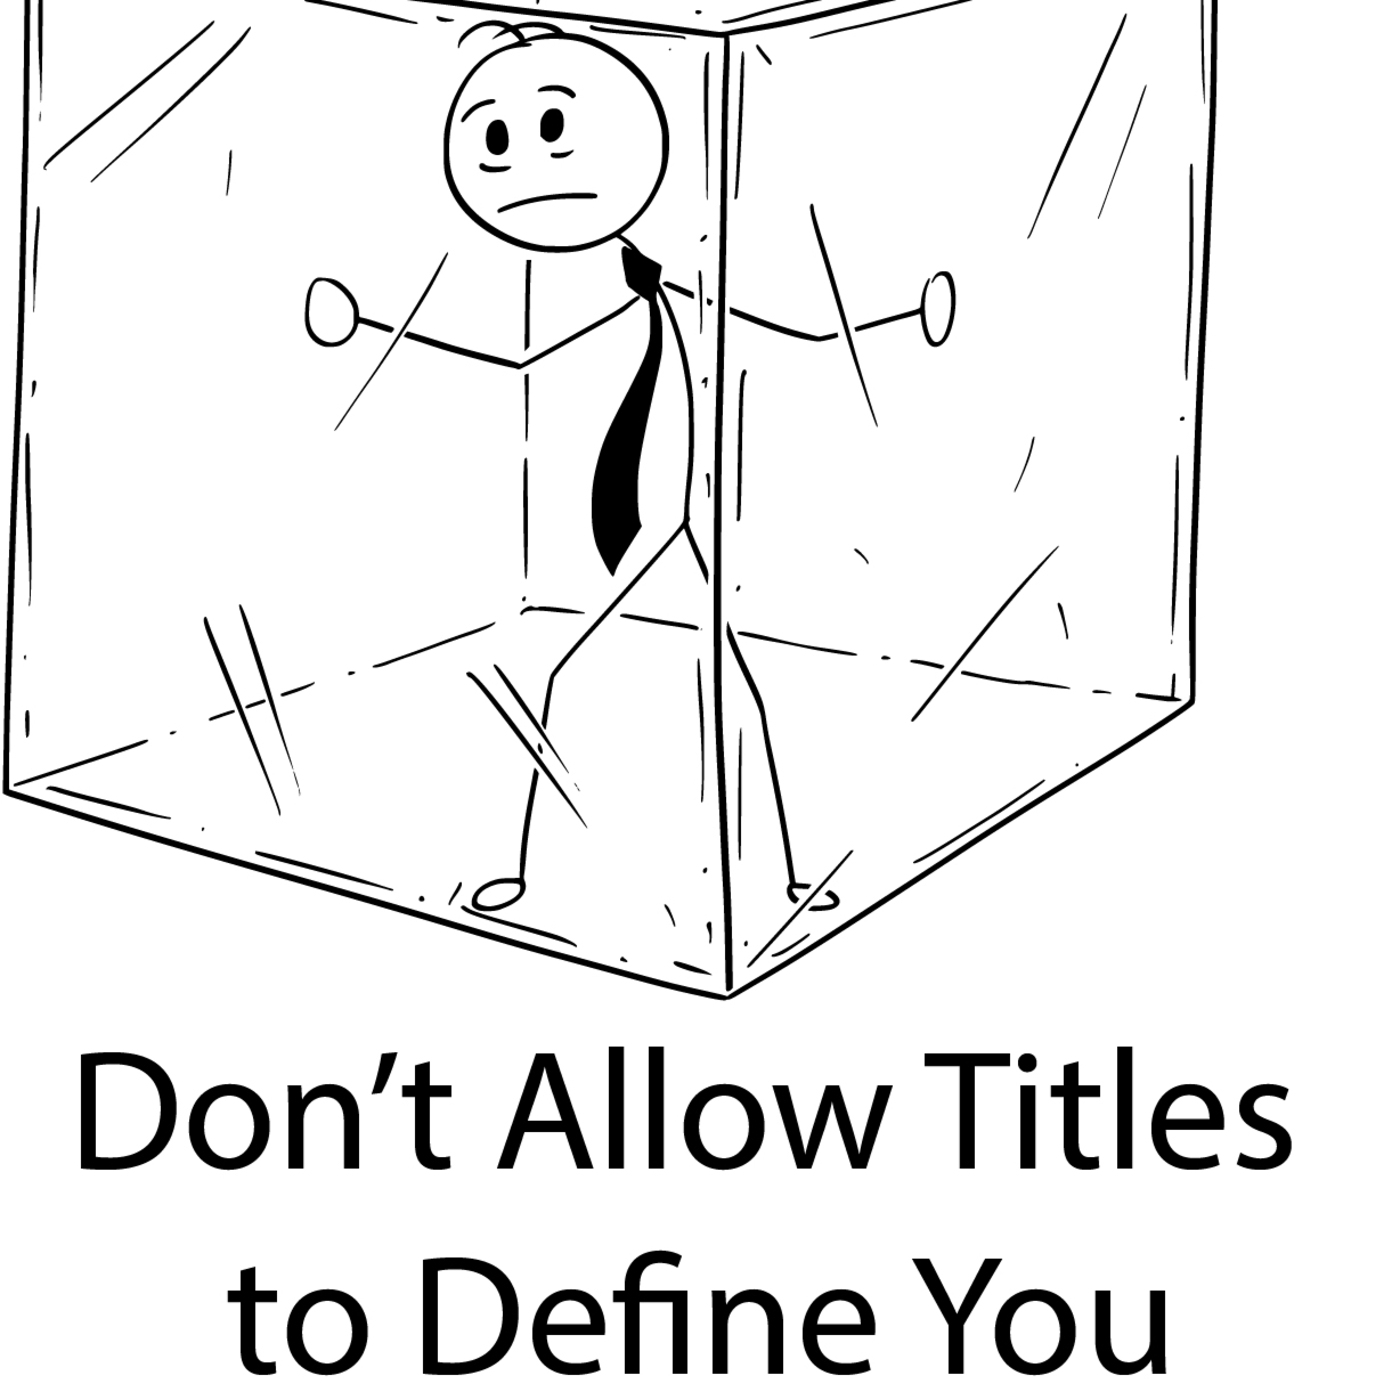 Leadership Imprisonment: Don't Allow Titles to Define You